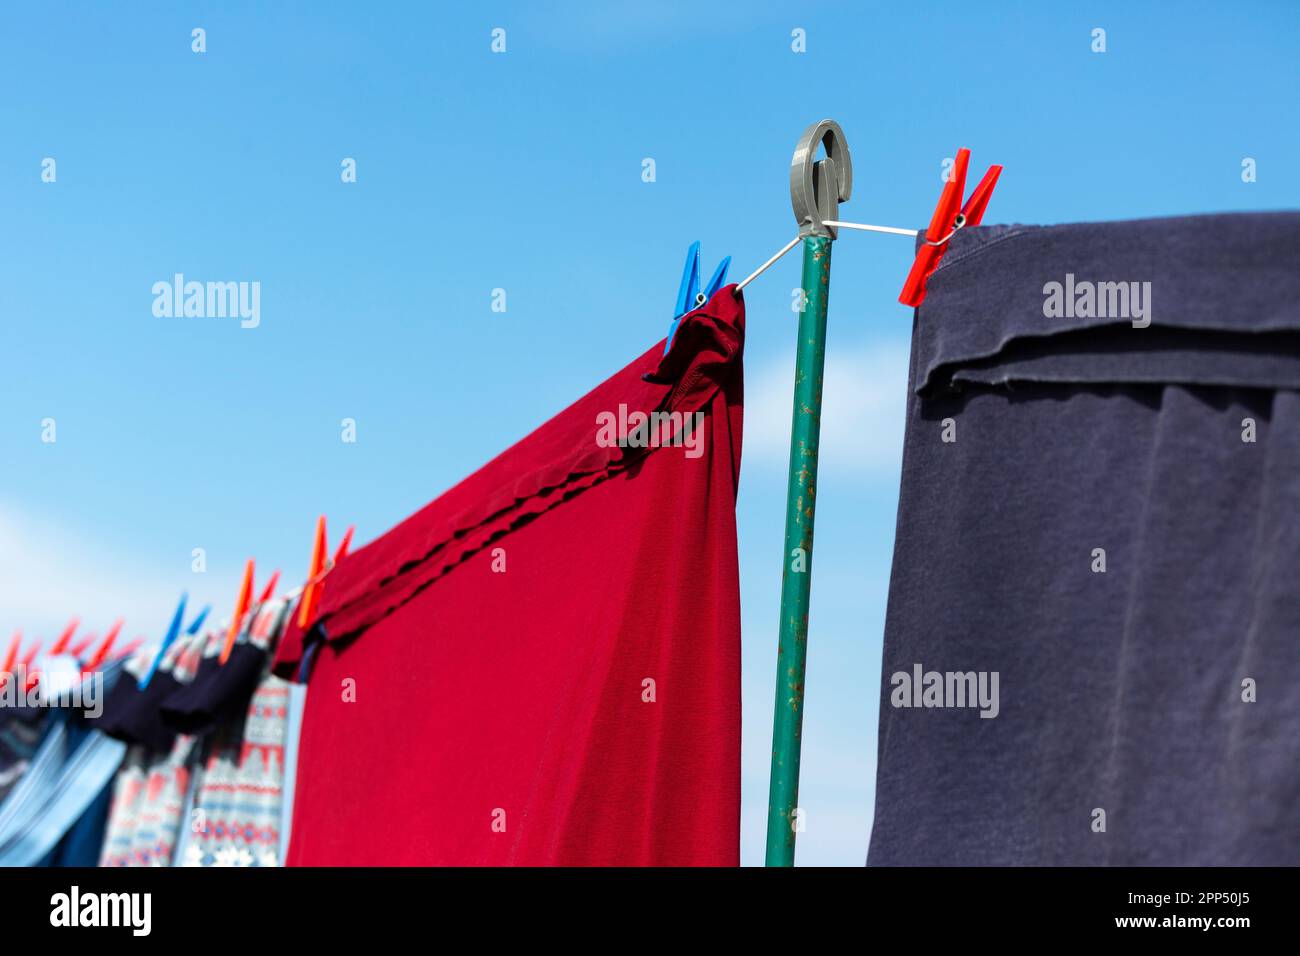 Clothes drying on a washing line with blue sky Stock Photo